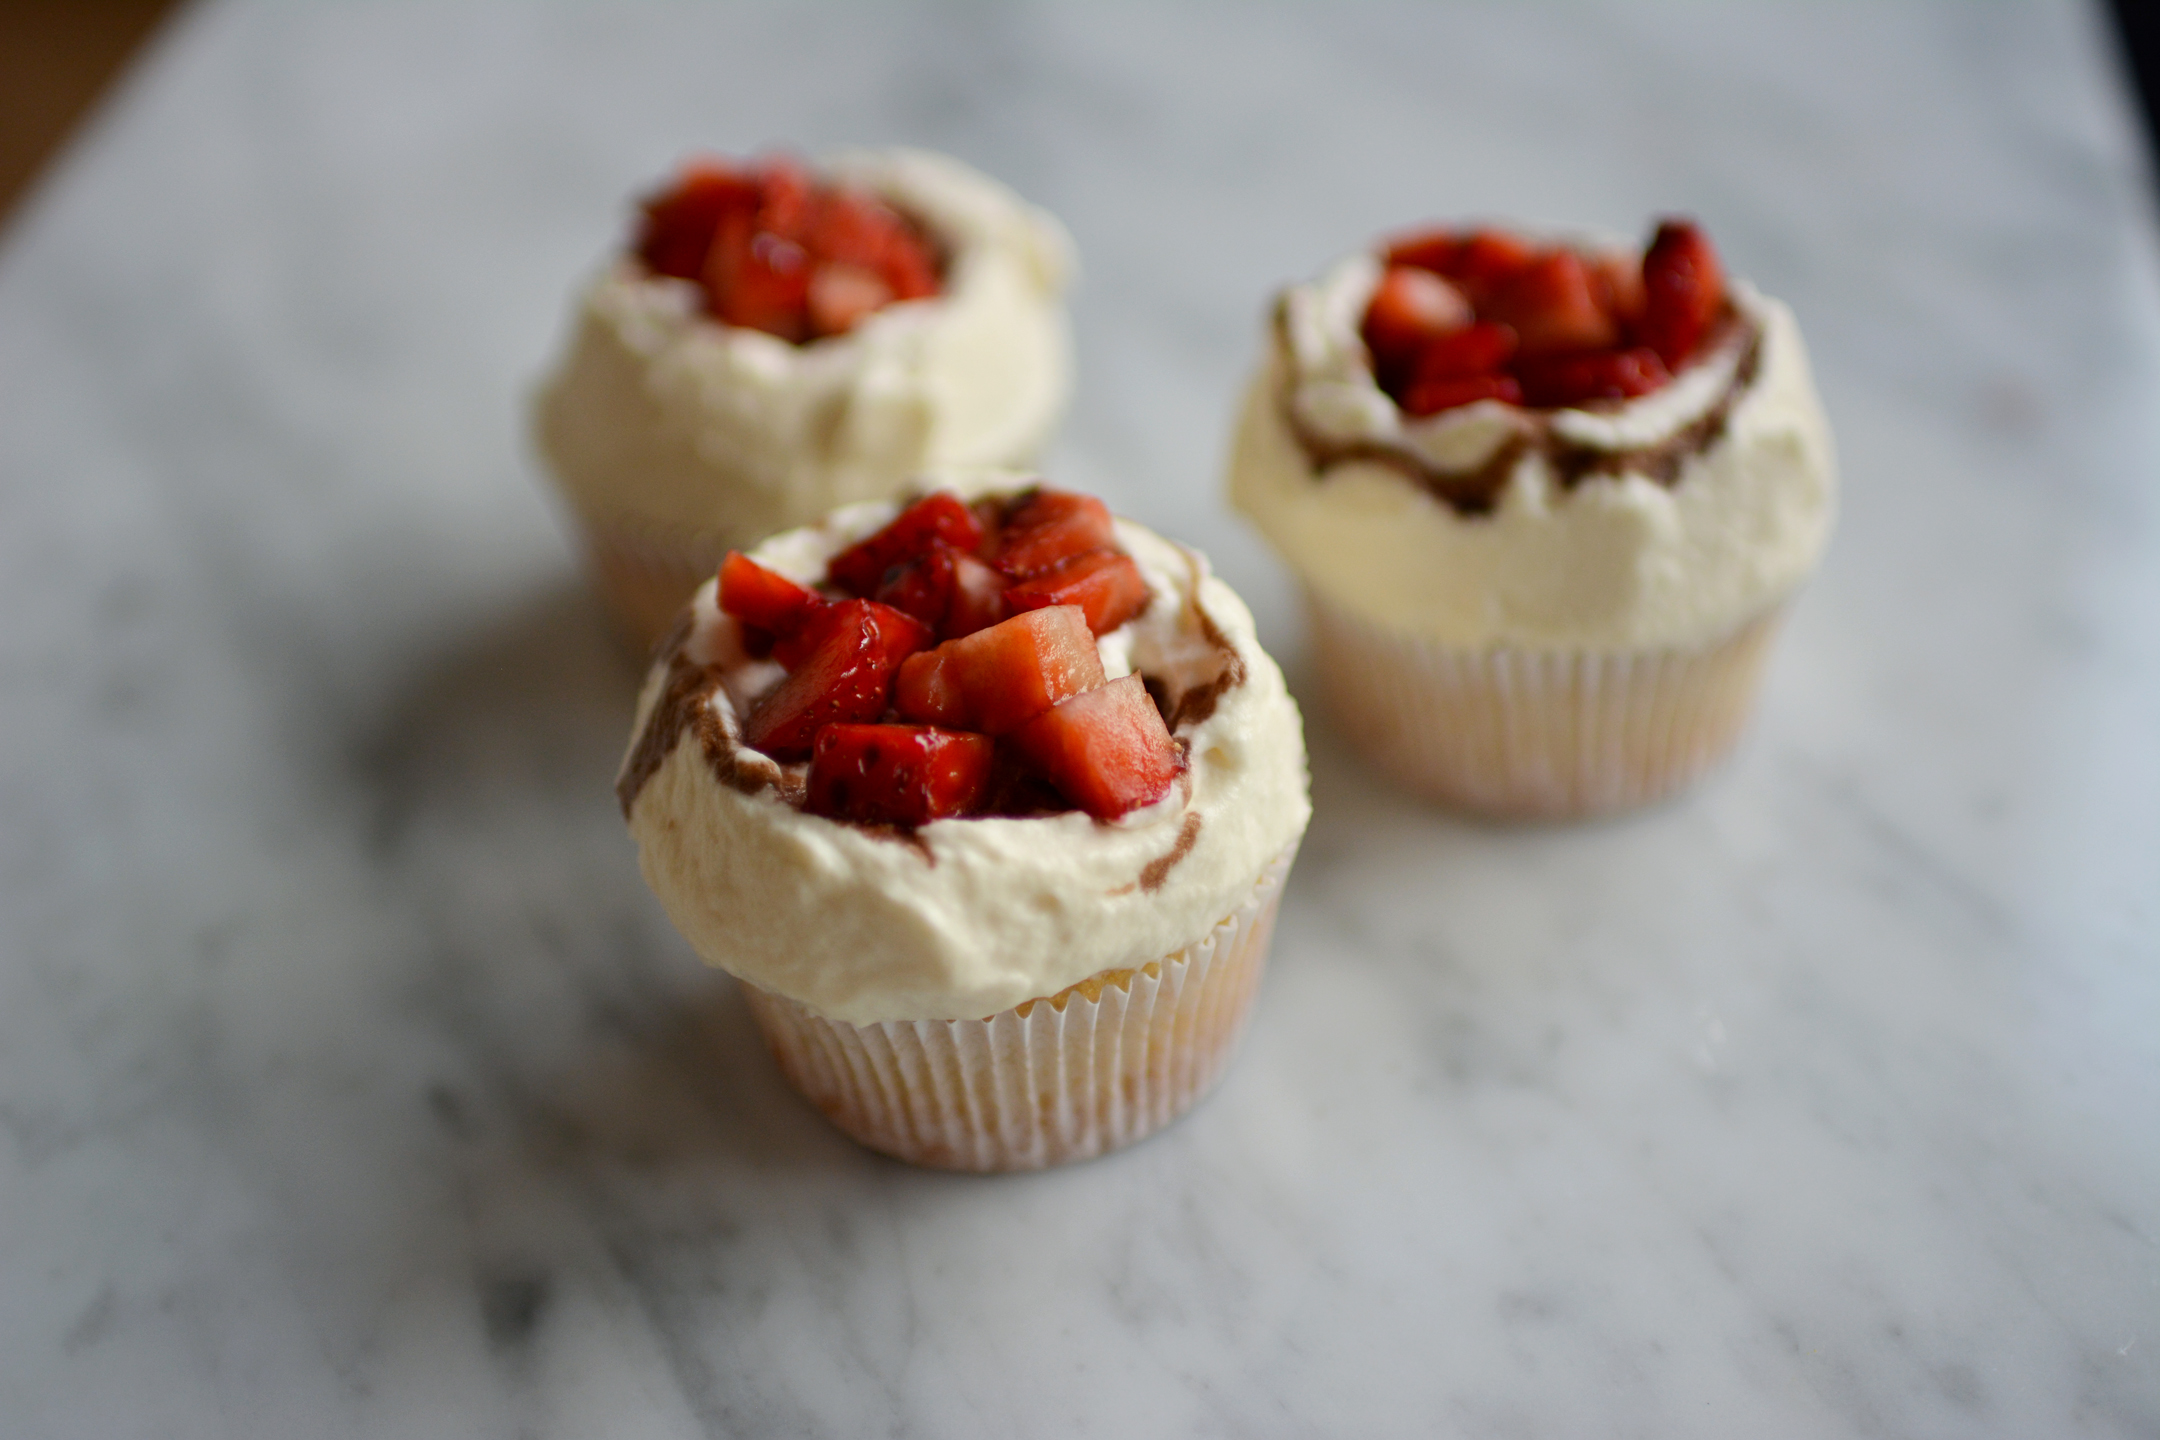 close-up view image of three cupcakes with fresh cream, strawberries, and balsamic vinegar glaze